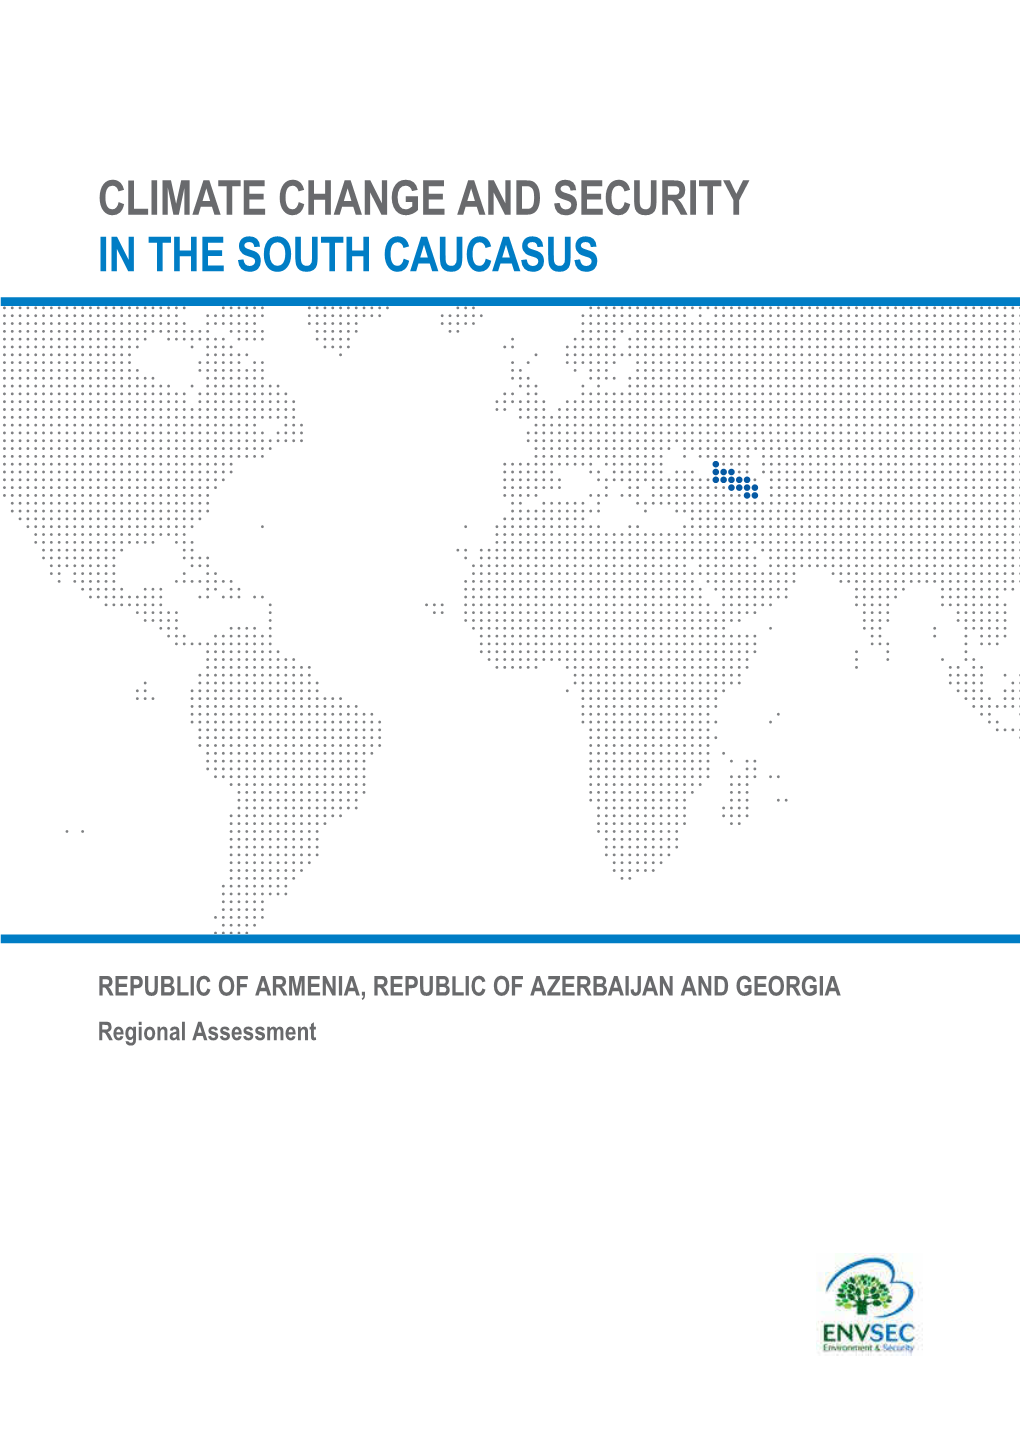 Climate Change and Security in the South Caucasus